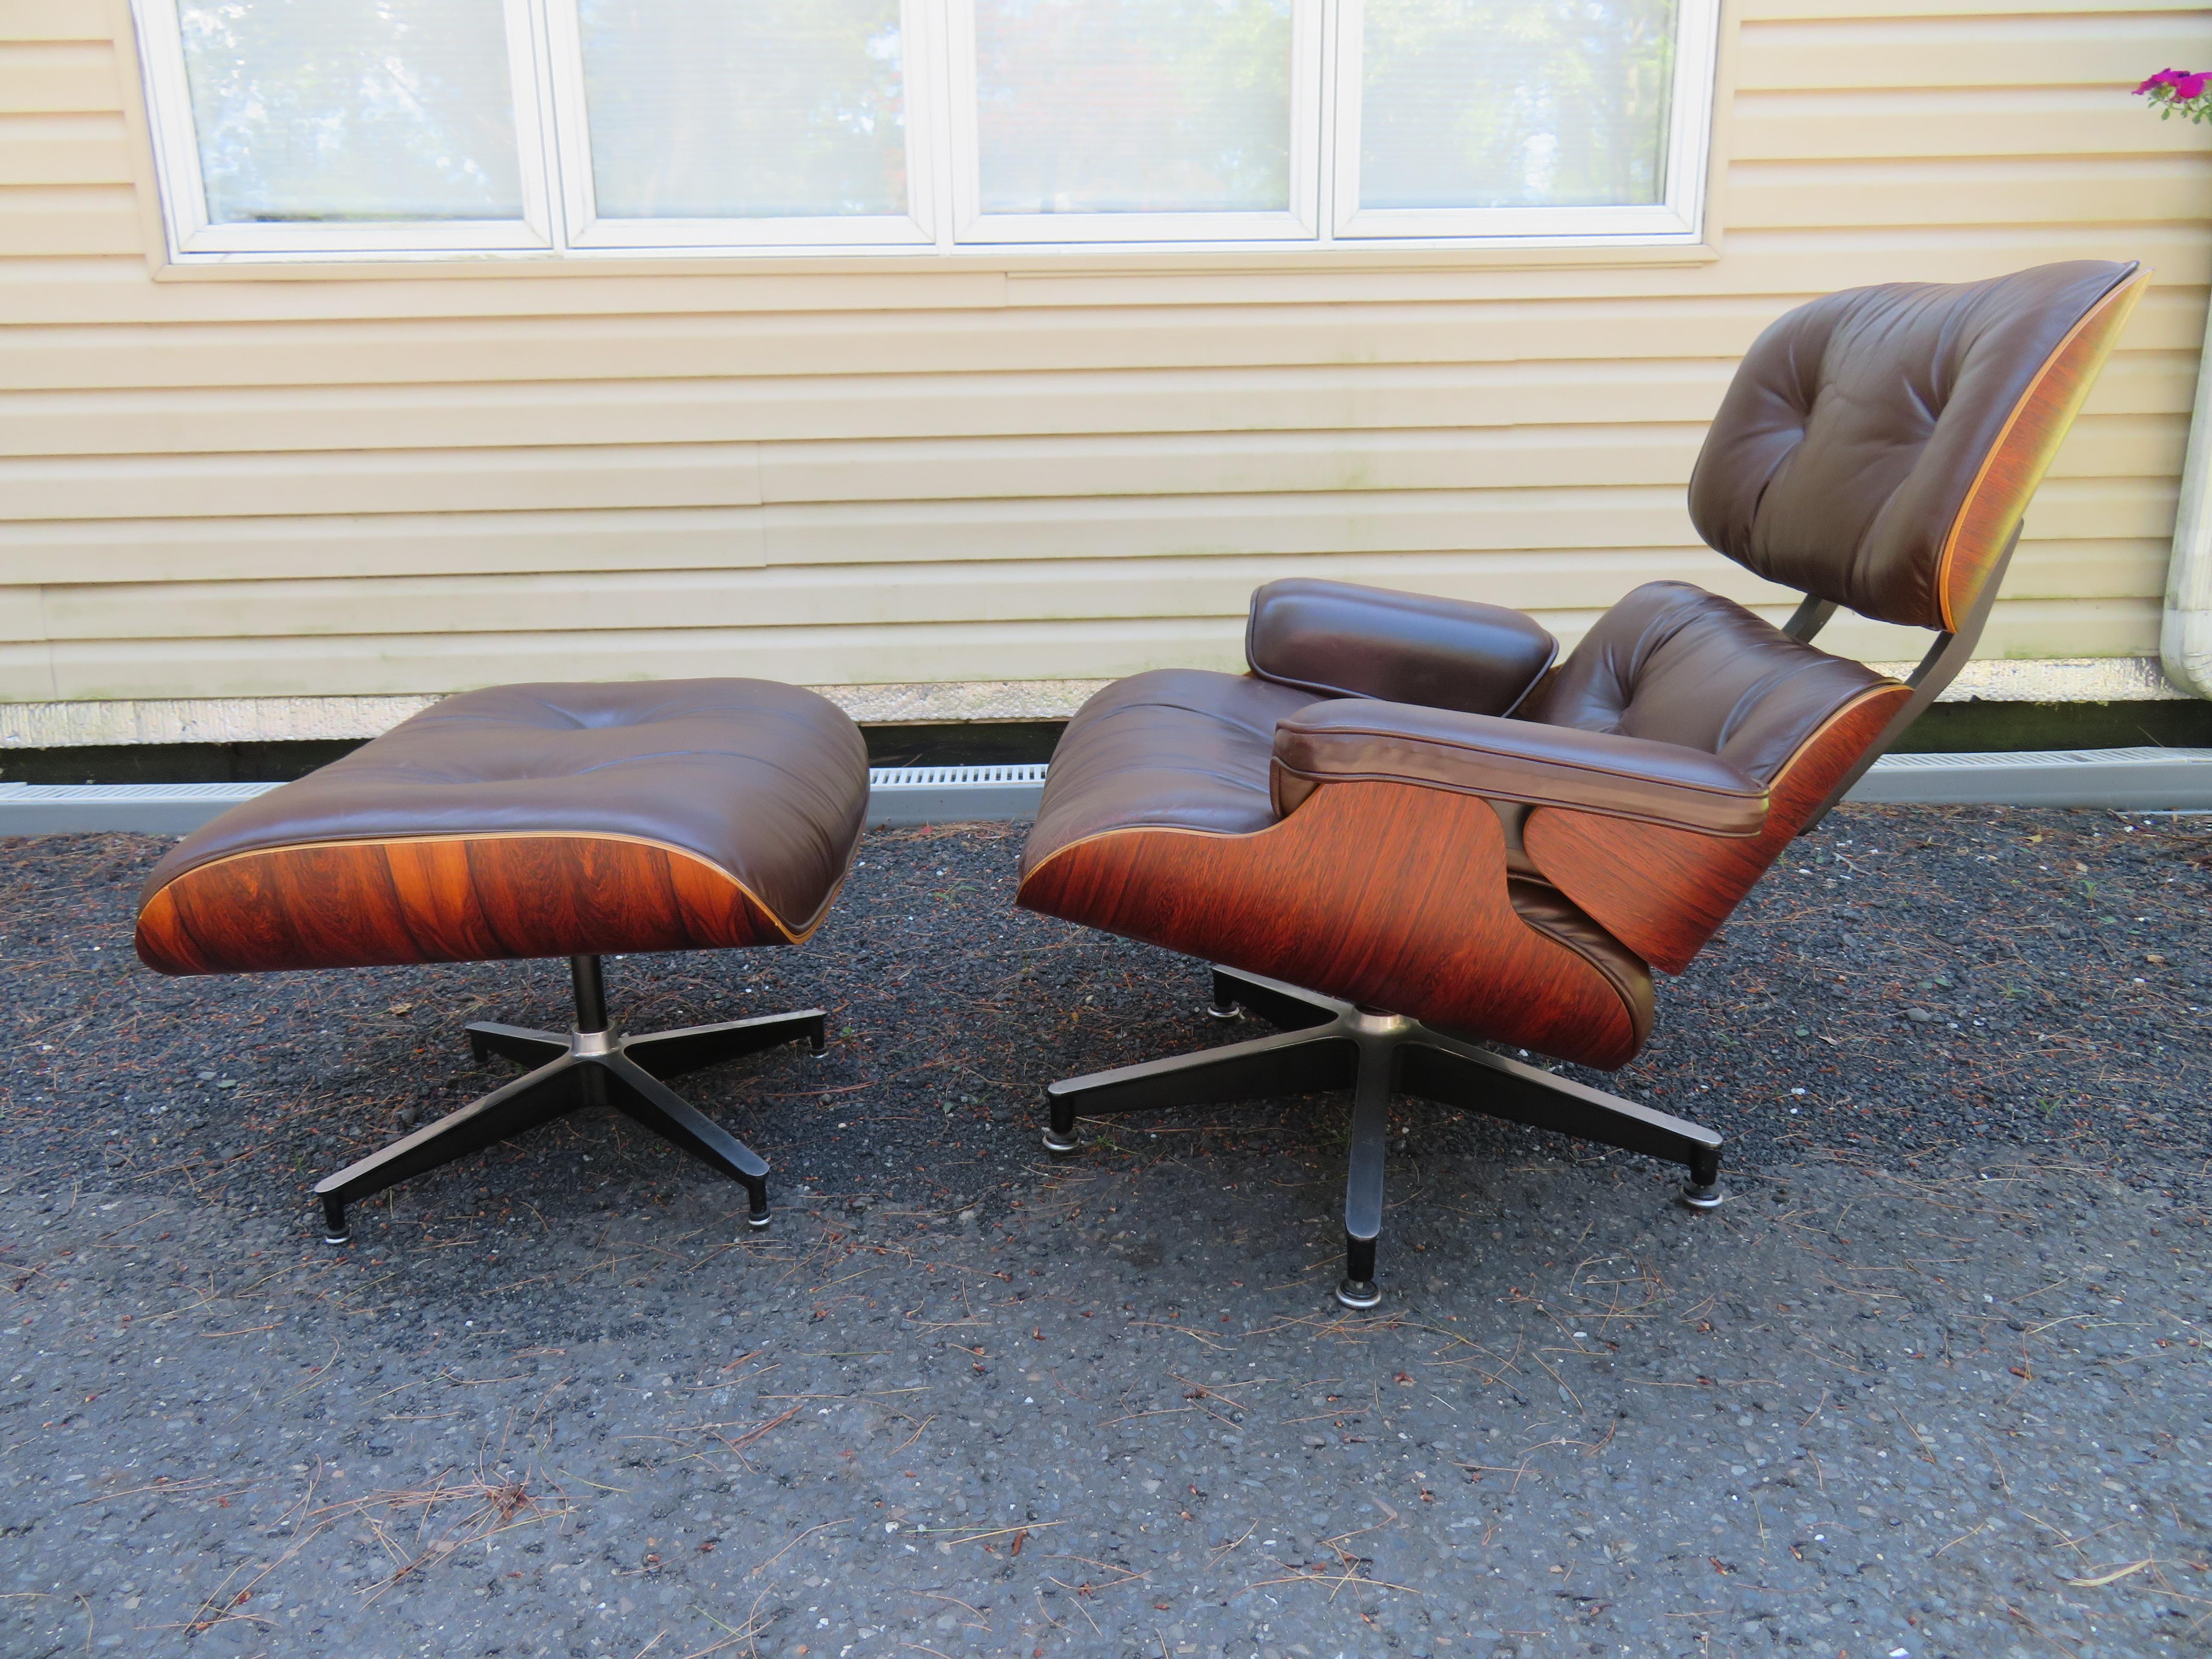 Iconic 670 lounge chair and 671 ottoman, designed by Charles and Ray Eames for Herman Miller. A luxuriously soft and comfortable design. Frame showcases the gorgeous Brazilian rosewood selection, which is polished and gleaming. This set retains its